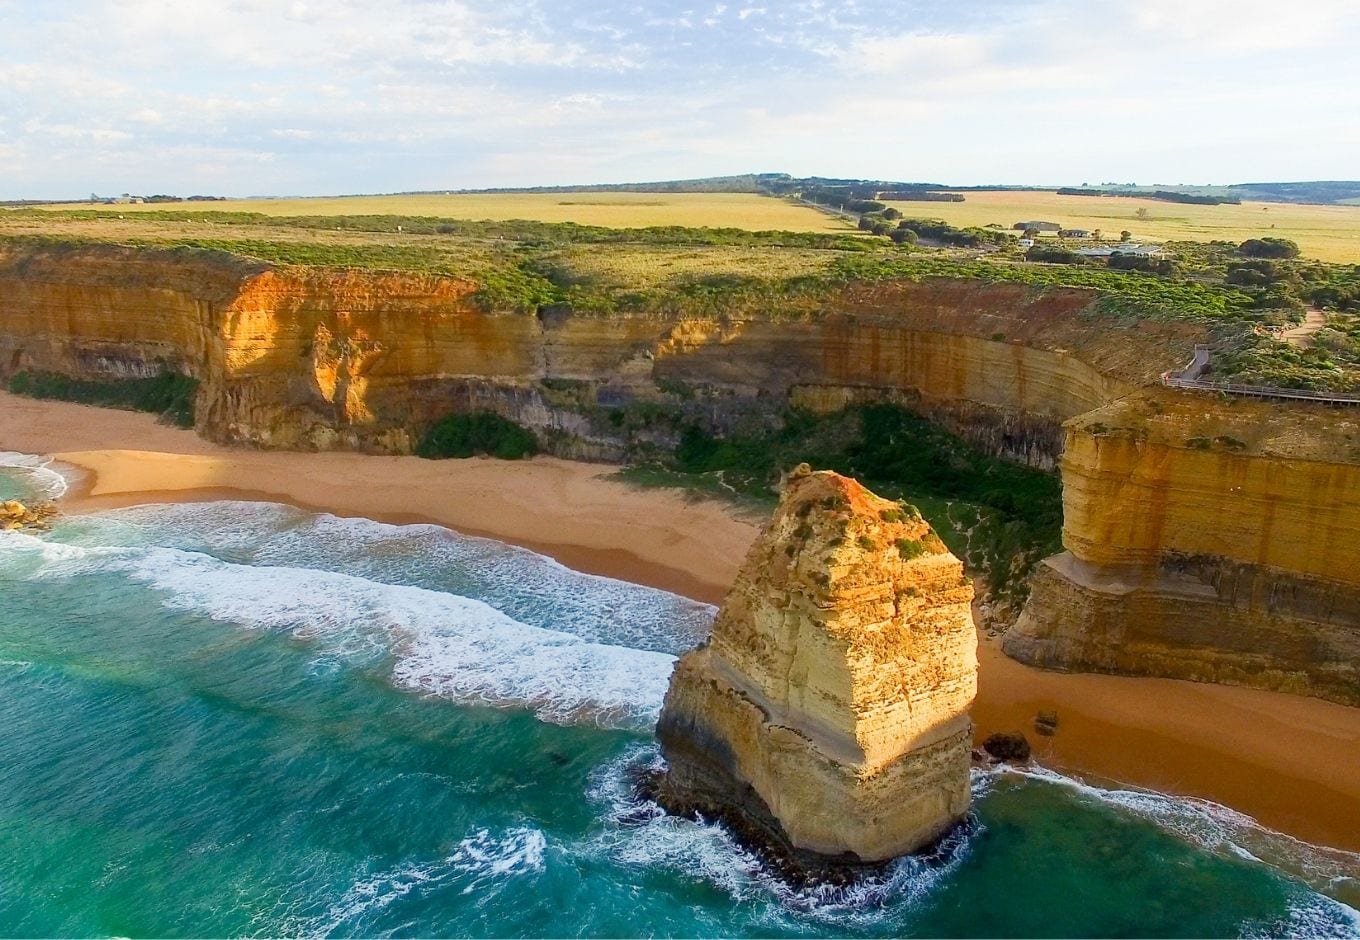 The turquoise ocean surrounded by cliffs on the Great Ocean Road, in Australia.